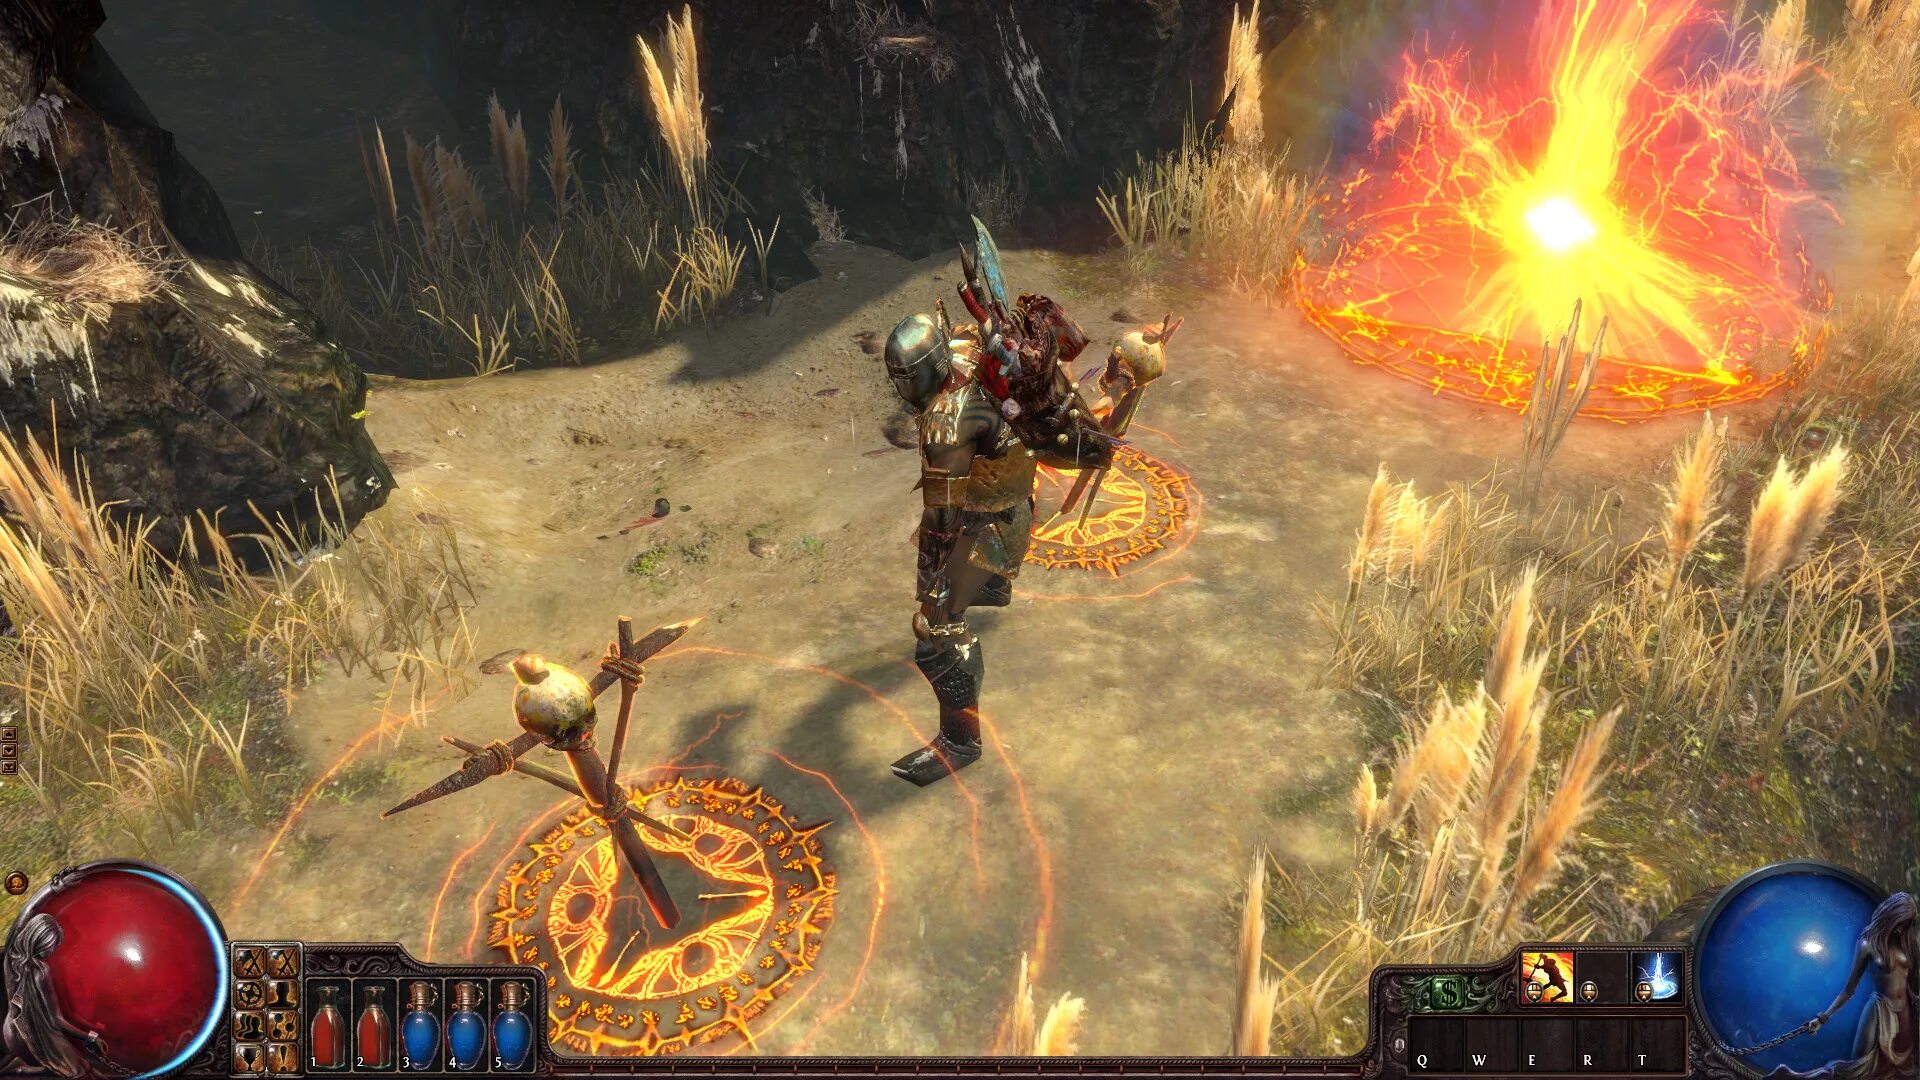 Poe patch. Игра Pass of Exile. Path of Exile 2. Path of Exile геймплей. Патов эксаил.